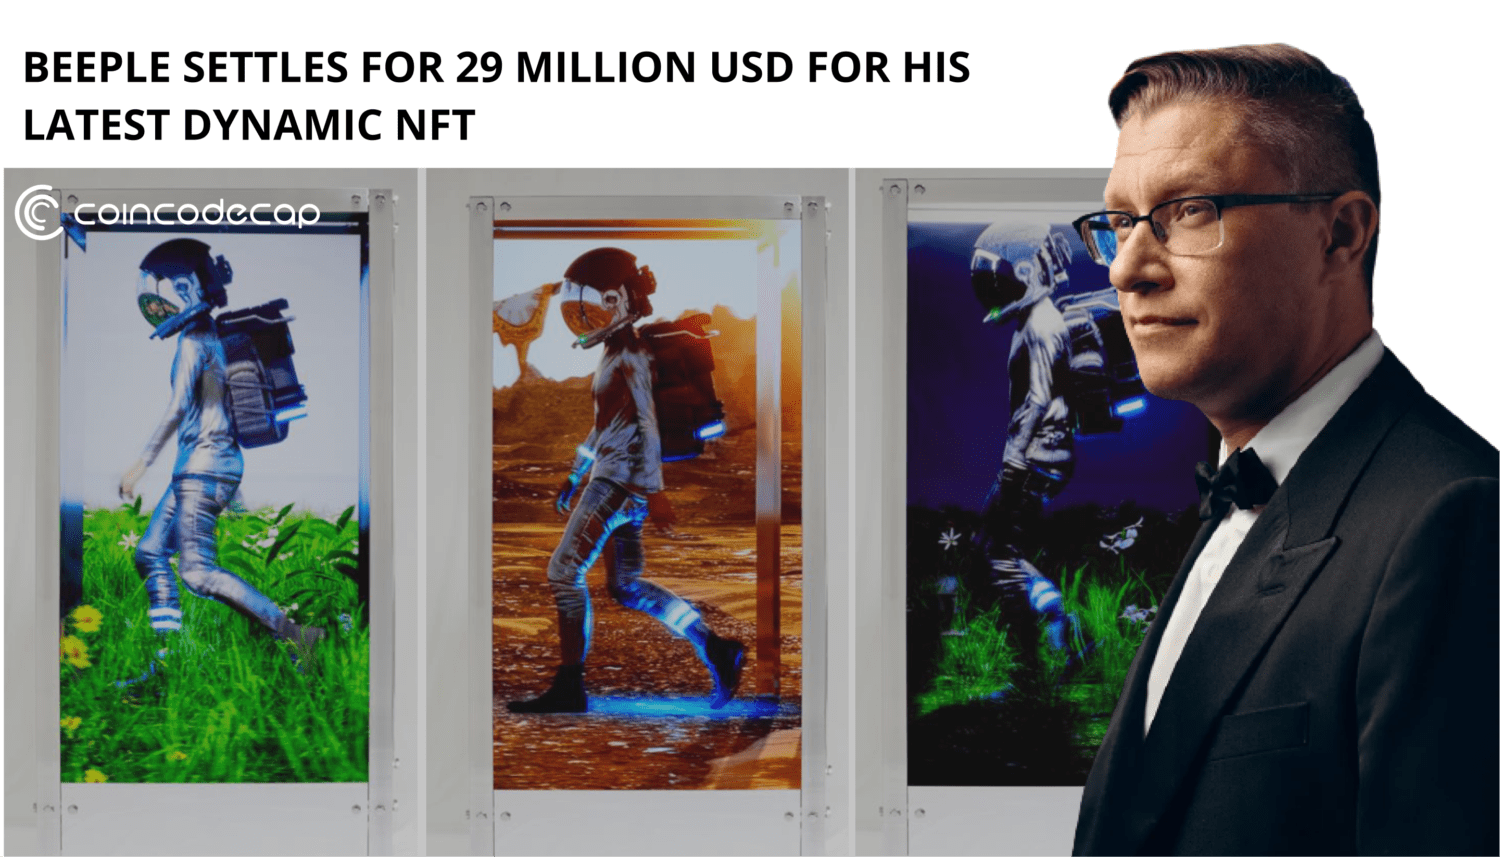 Beeple Settles For 29 Million Usd For His Latest Dynamic Nft